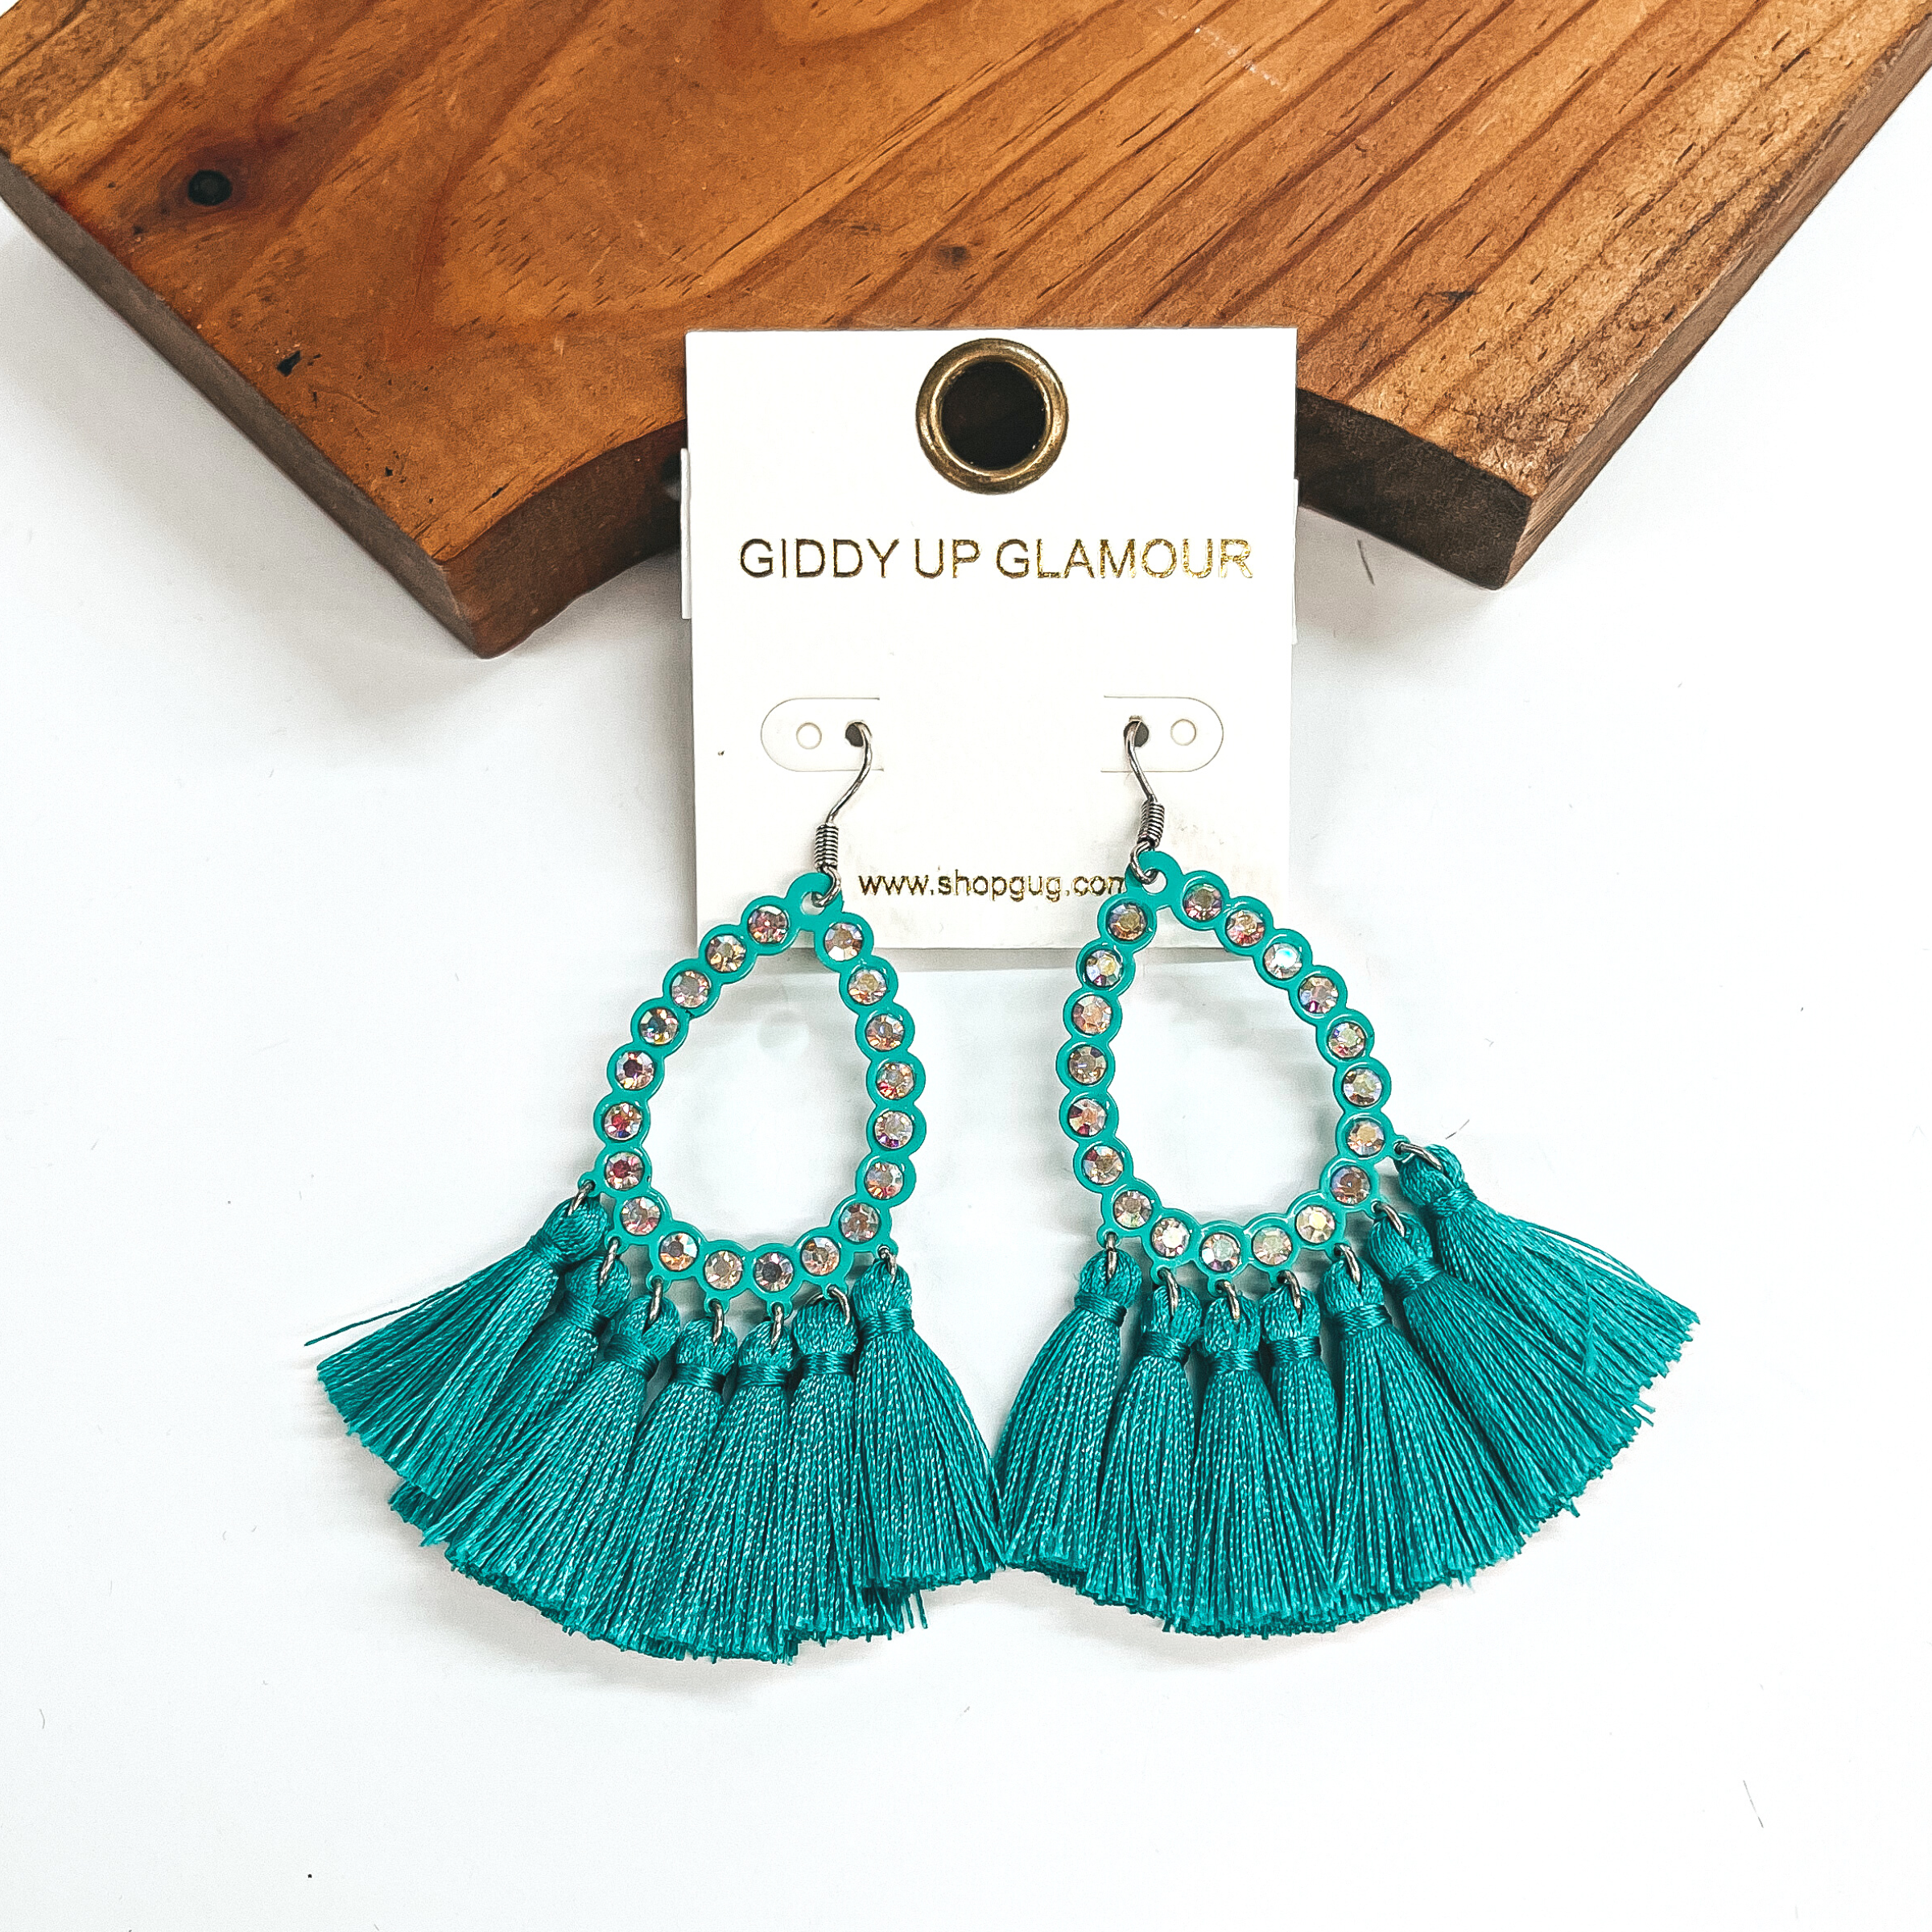 Small AB Crystal Teardrop Earrings with Tassel Trim in Turquoise - Giddy Up Glamour Boutique